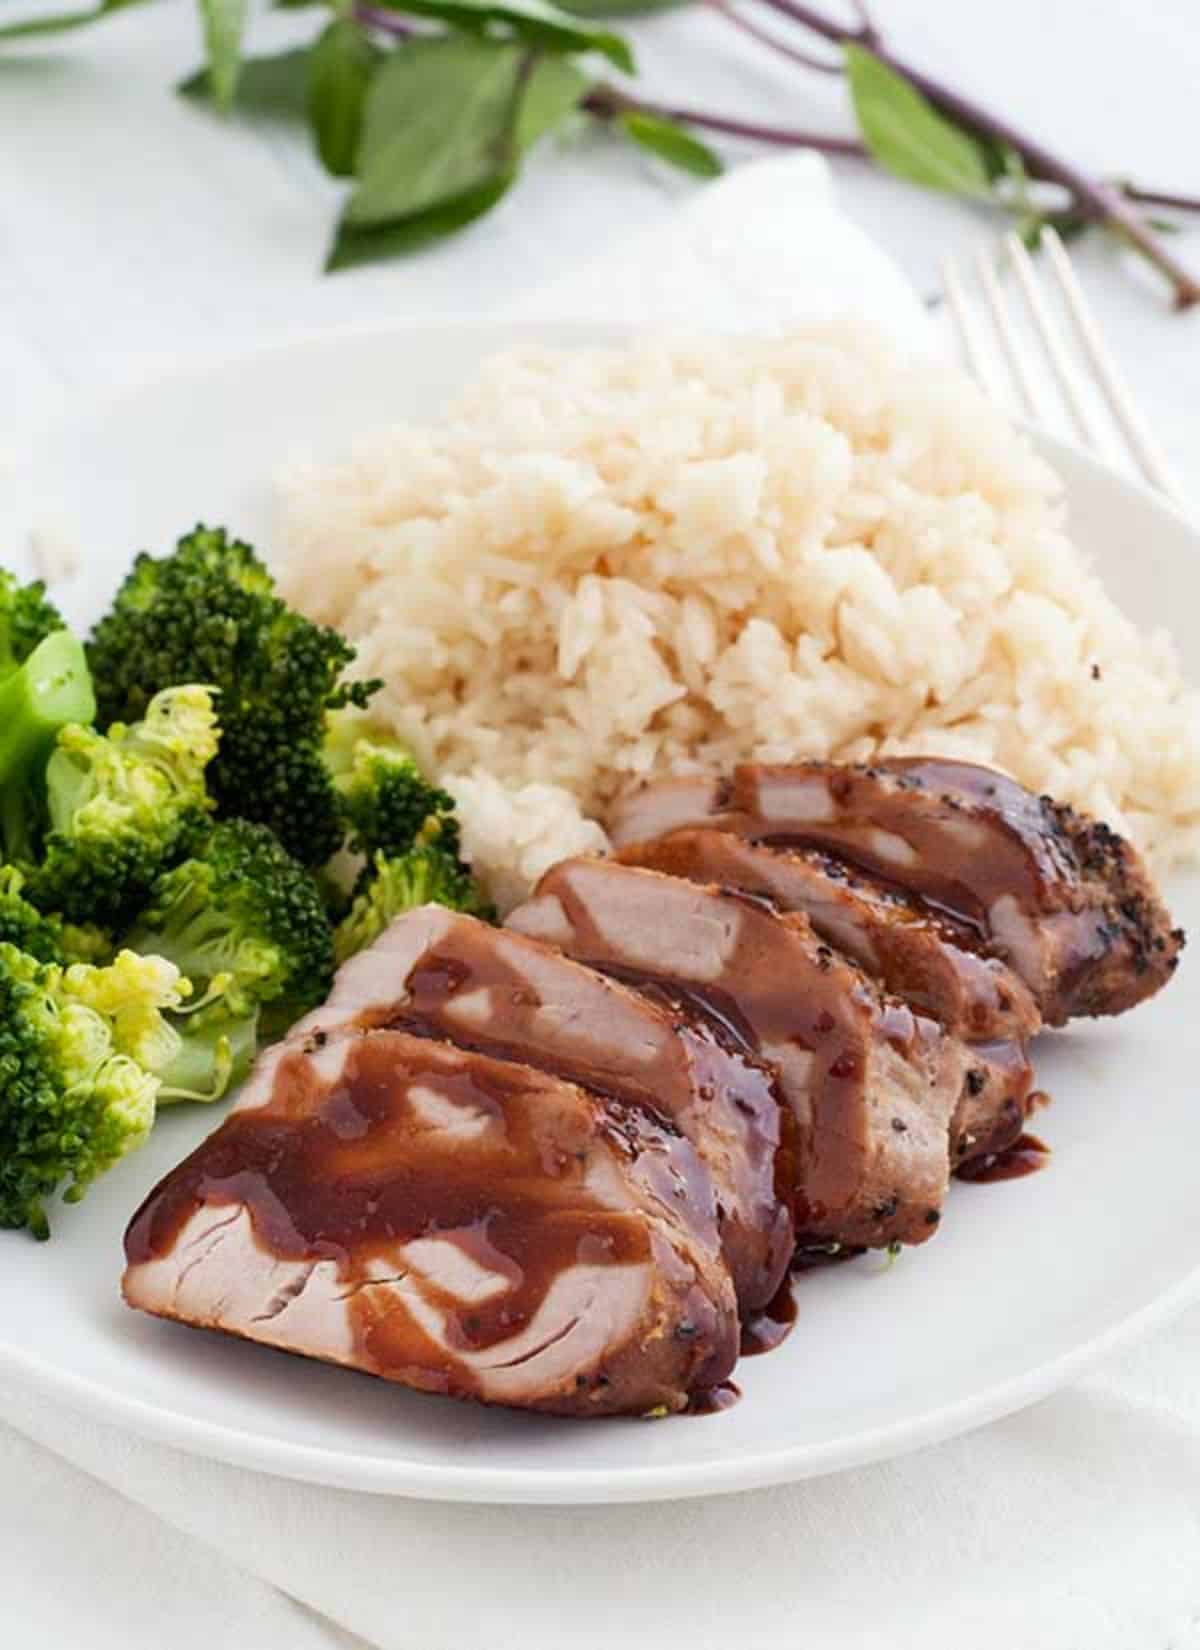 Tasty Gluten-Free Asian Glazed Pork Tenderloin with rice and broccoli on a white plate.